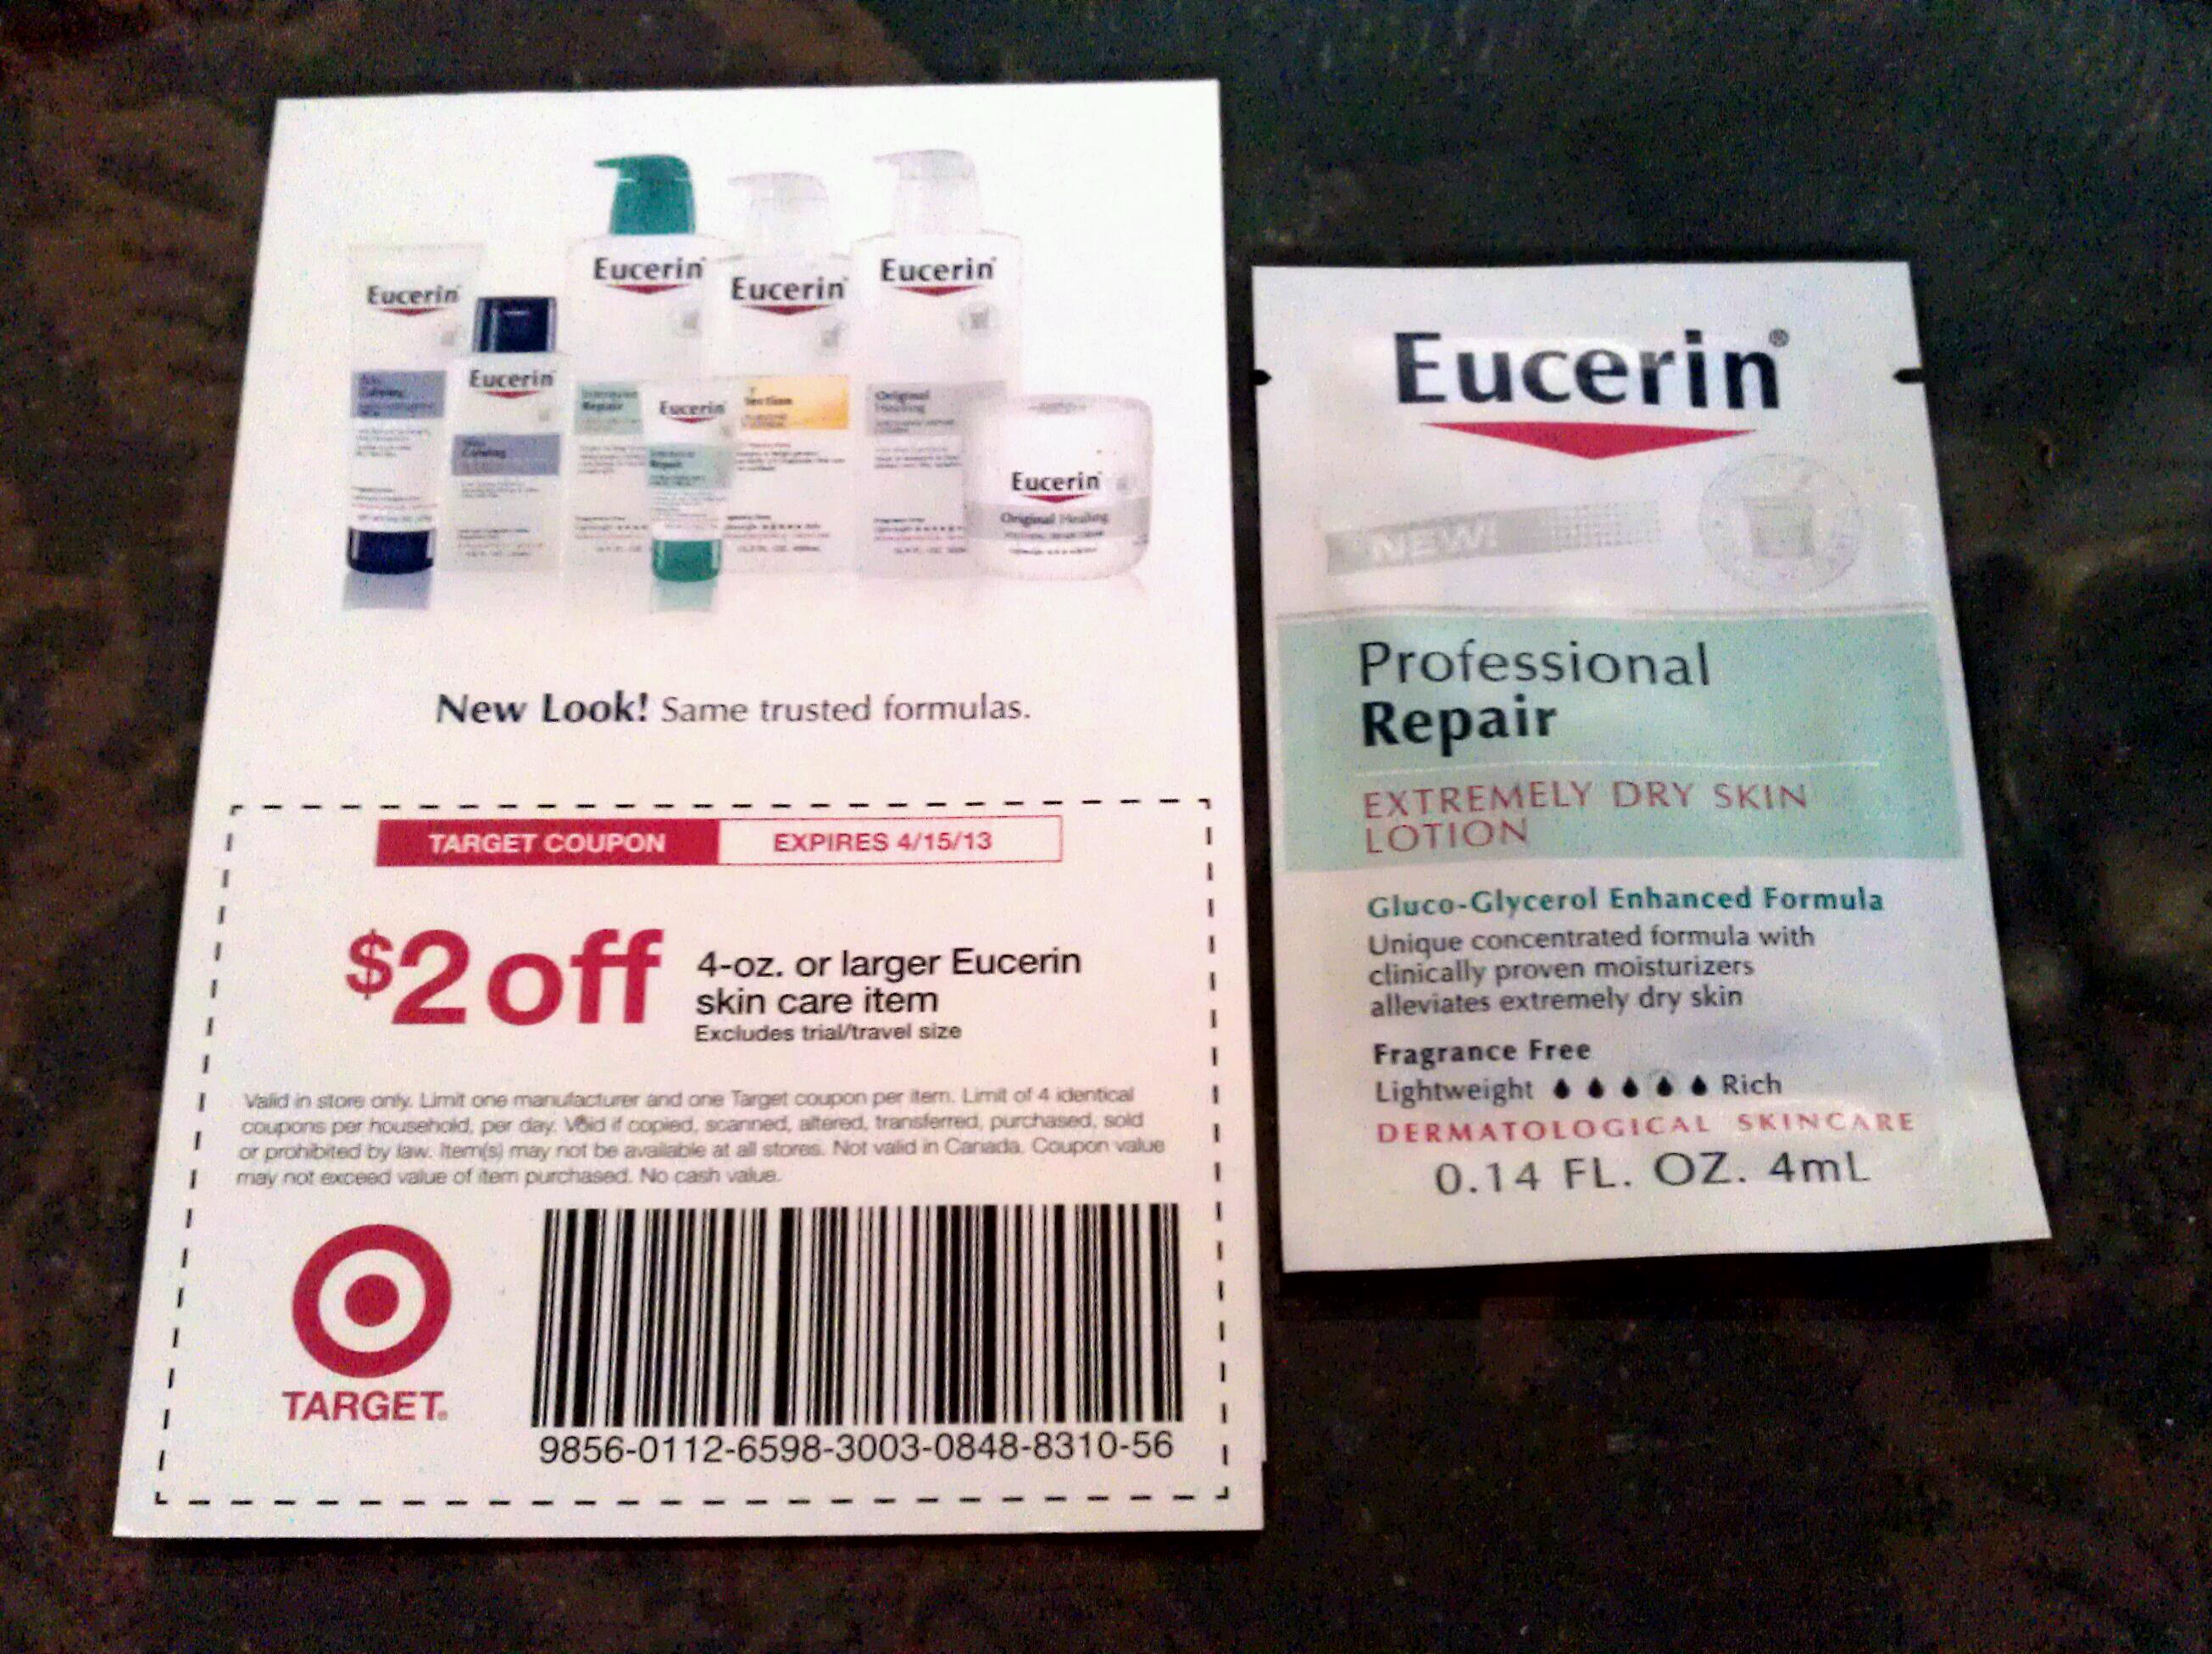 Eucerin Professional Repair lotion and coupon